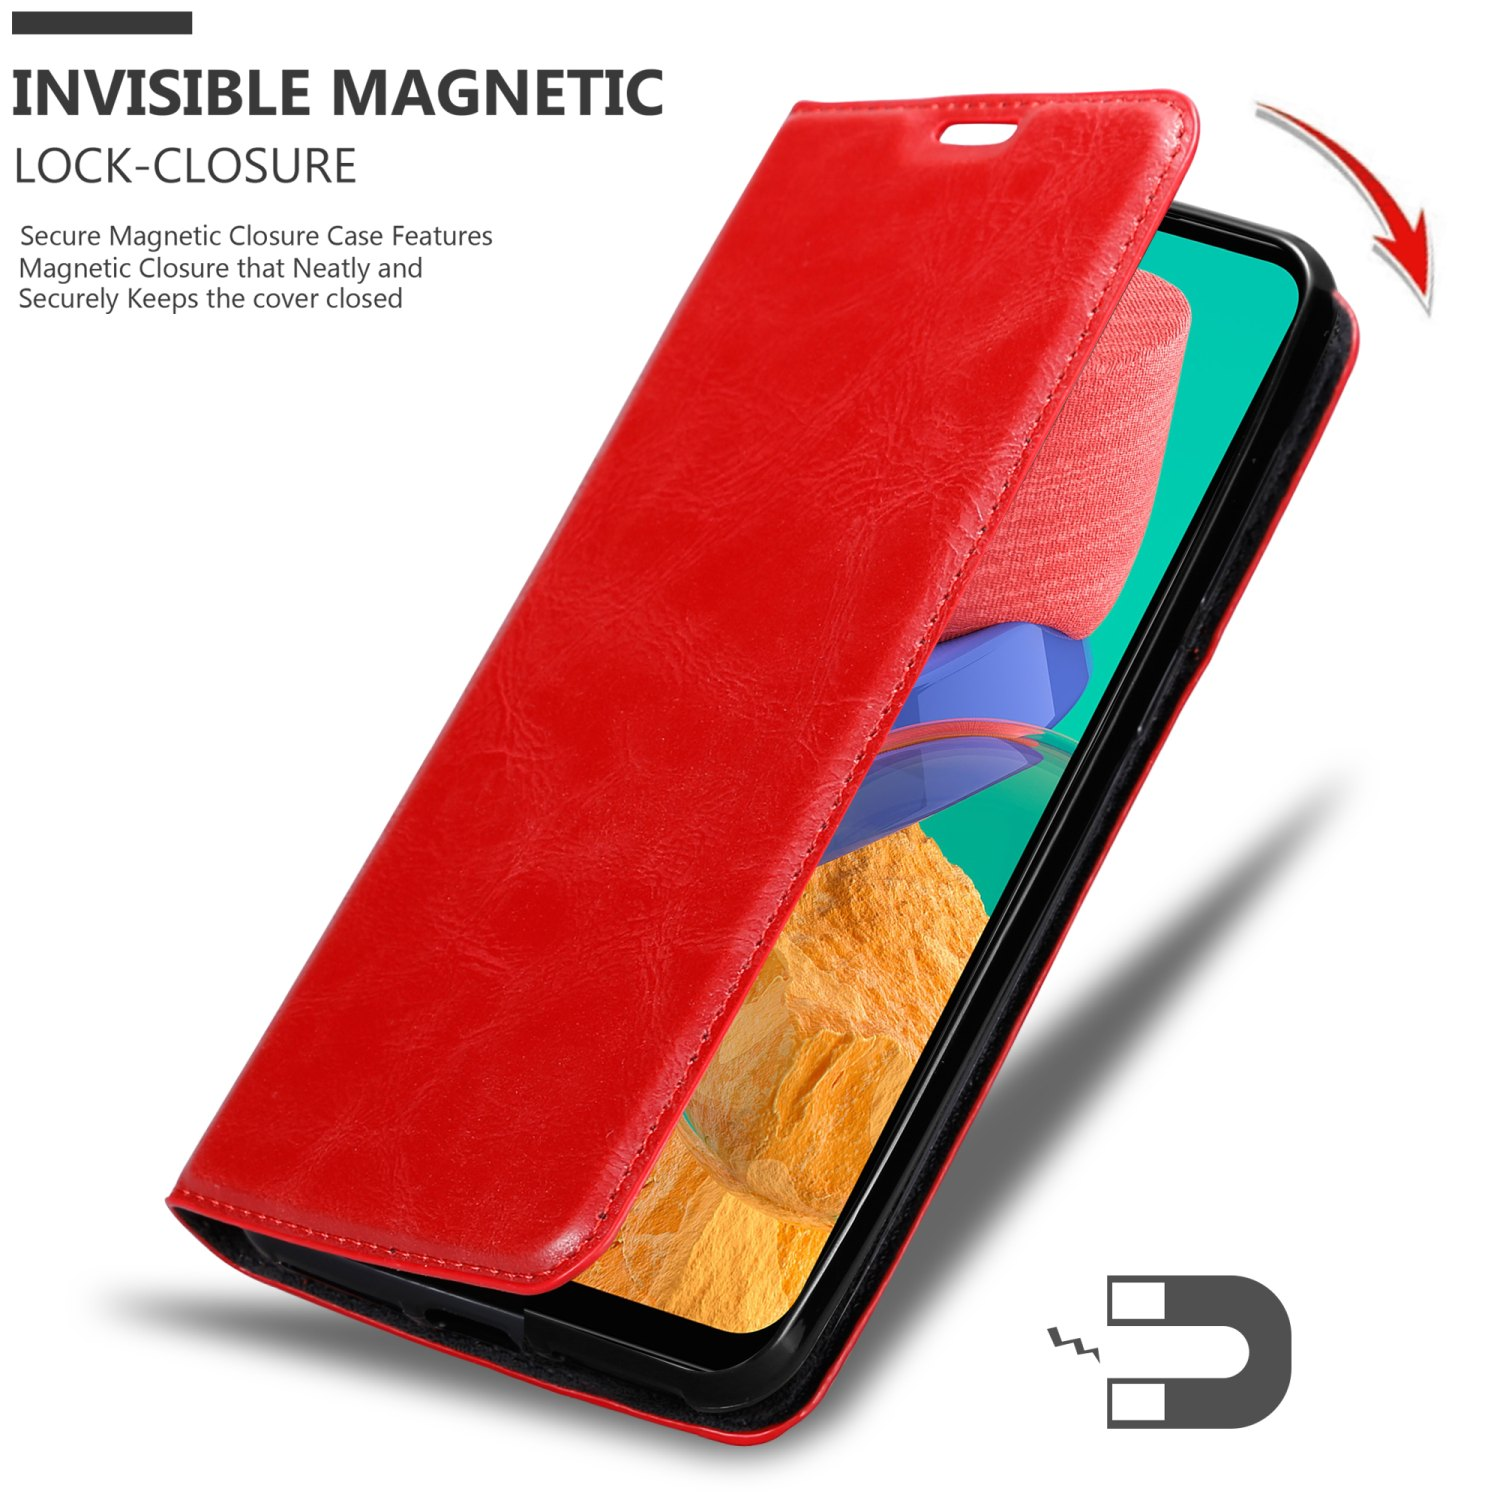 M33 Magnet, Samsung, Book ROT Invisible 5G, Galaxy CADORABO Bookcover, Hülle APFEL